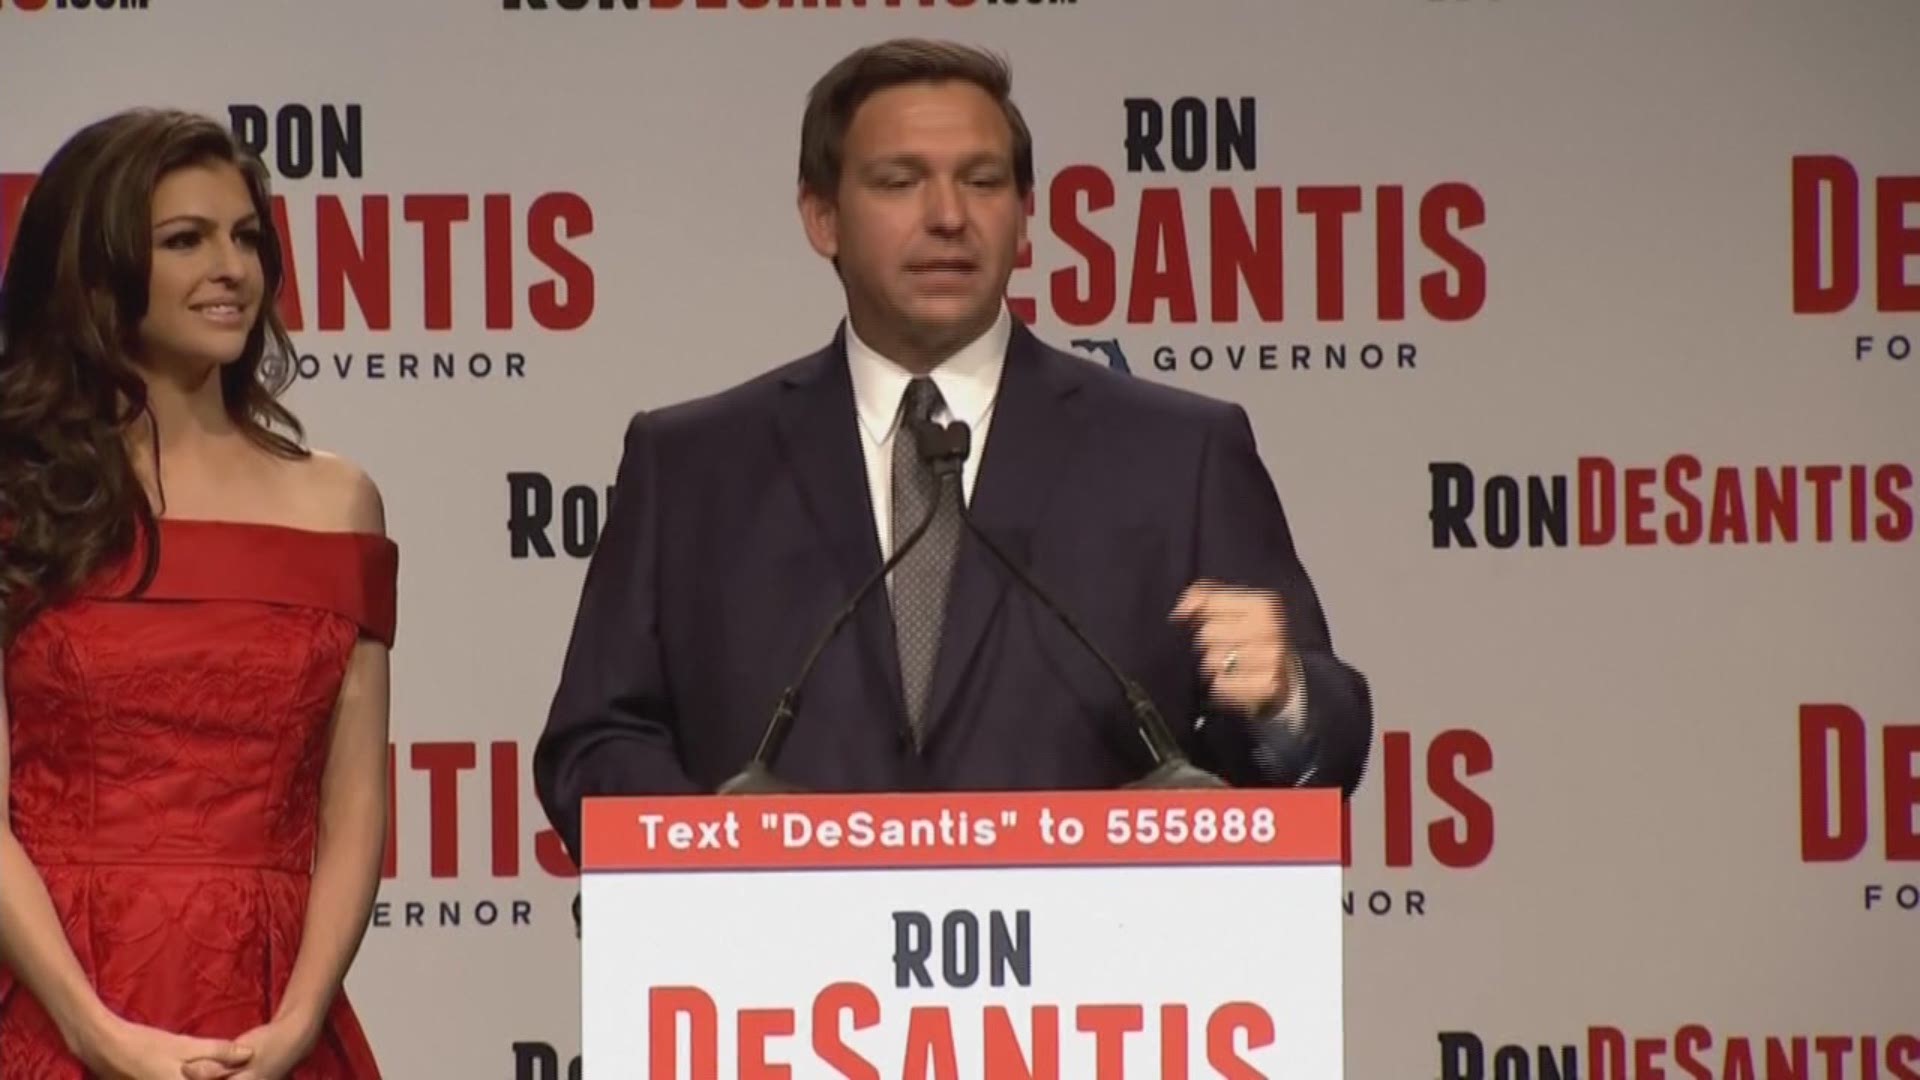 Ron DeSantis has won the Republican nod for Florida Governor and will face the Democratic nominee in November